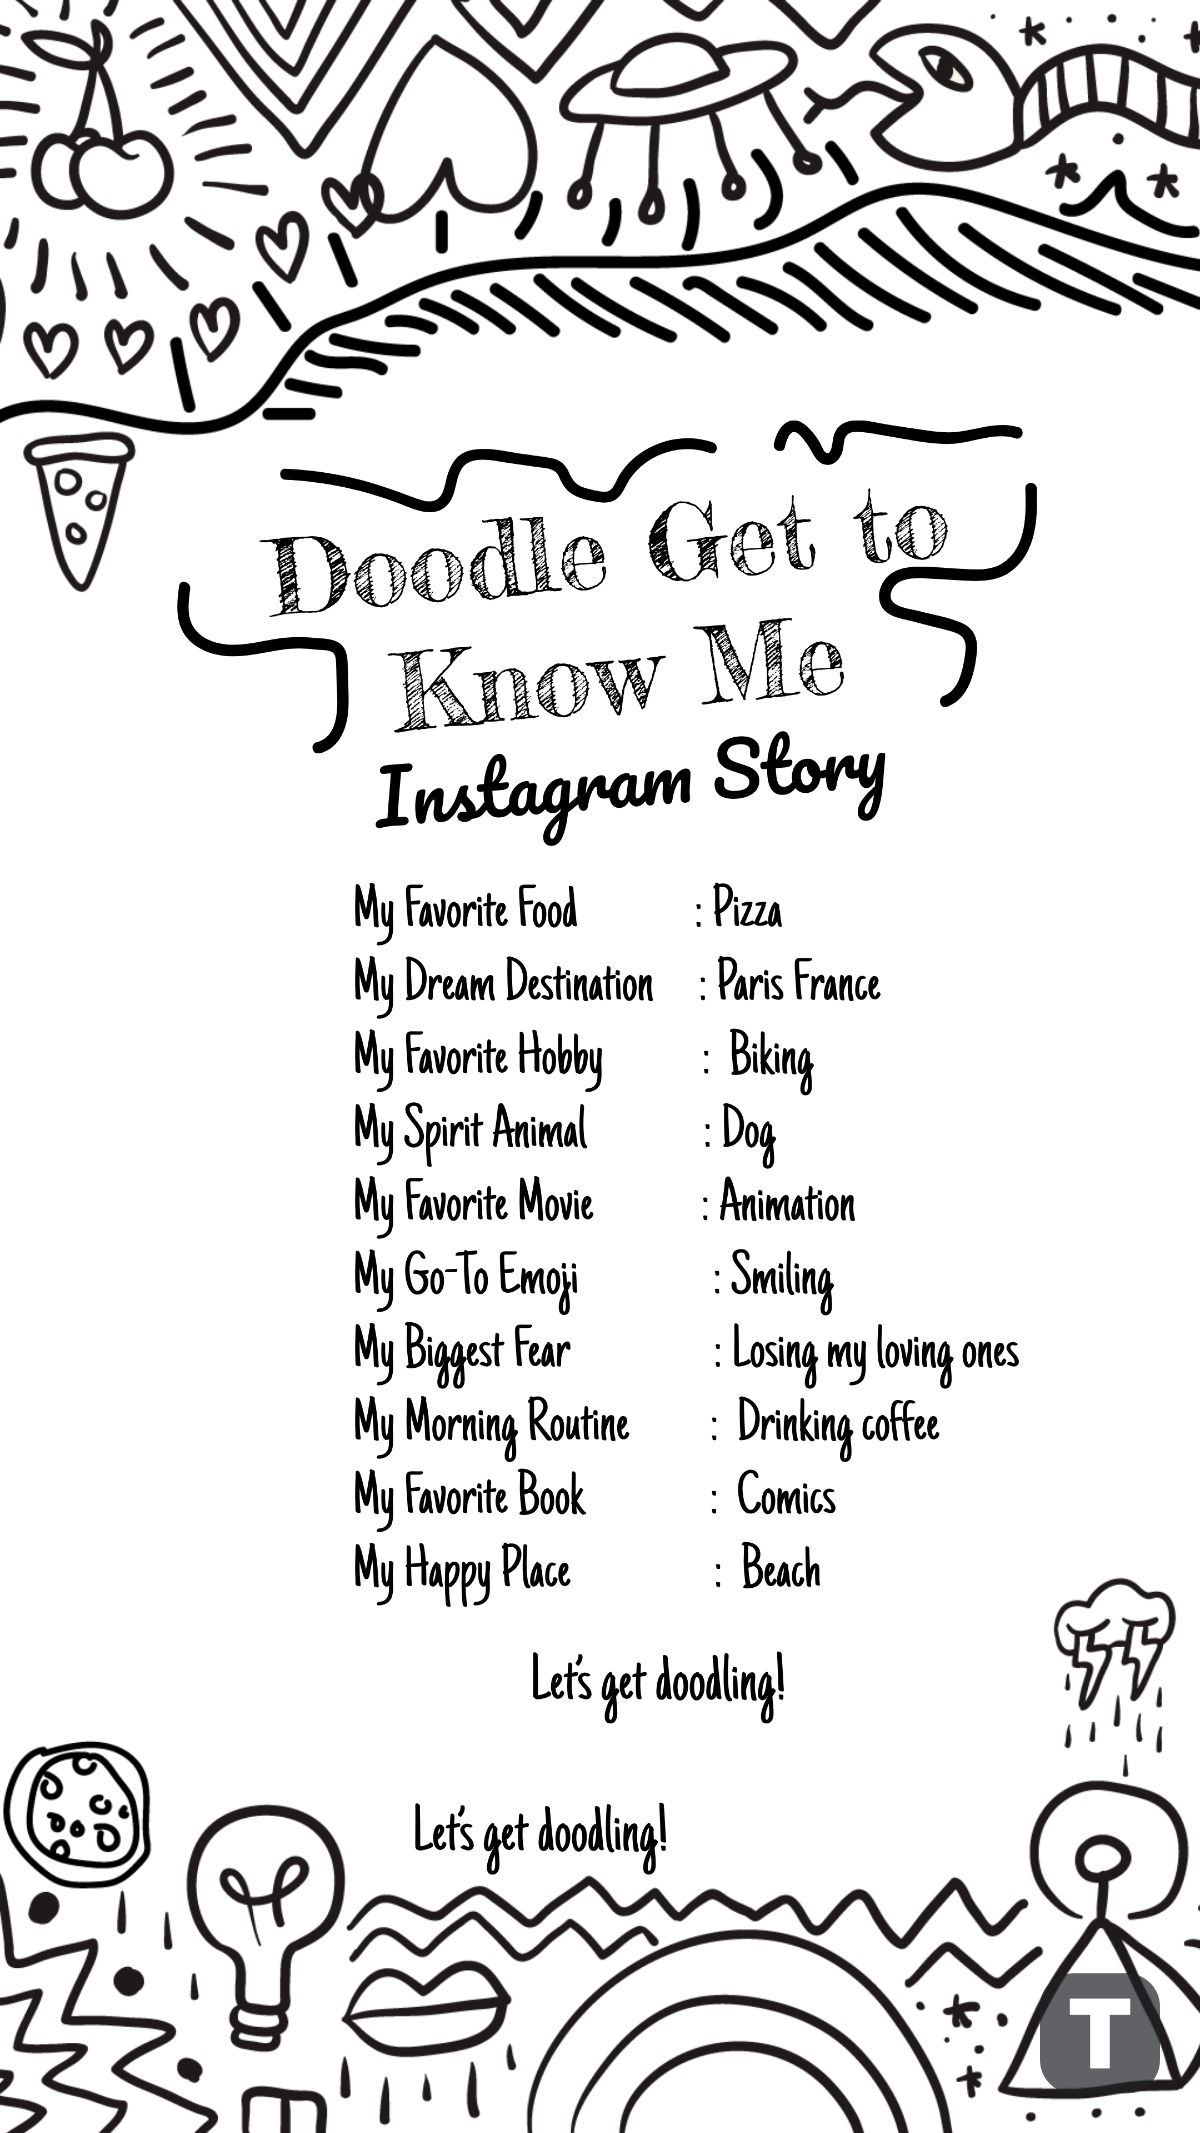 Doodle Get to Know Me Instagram Story